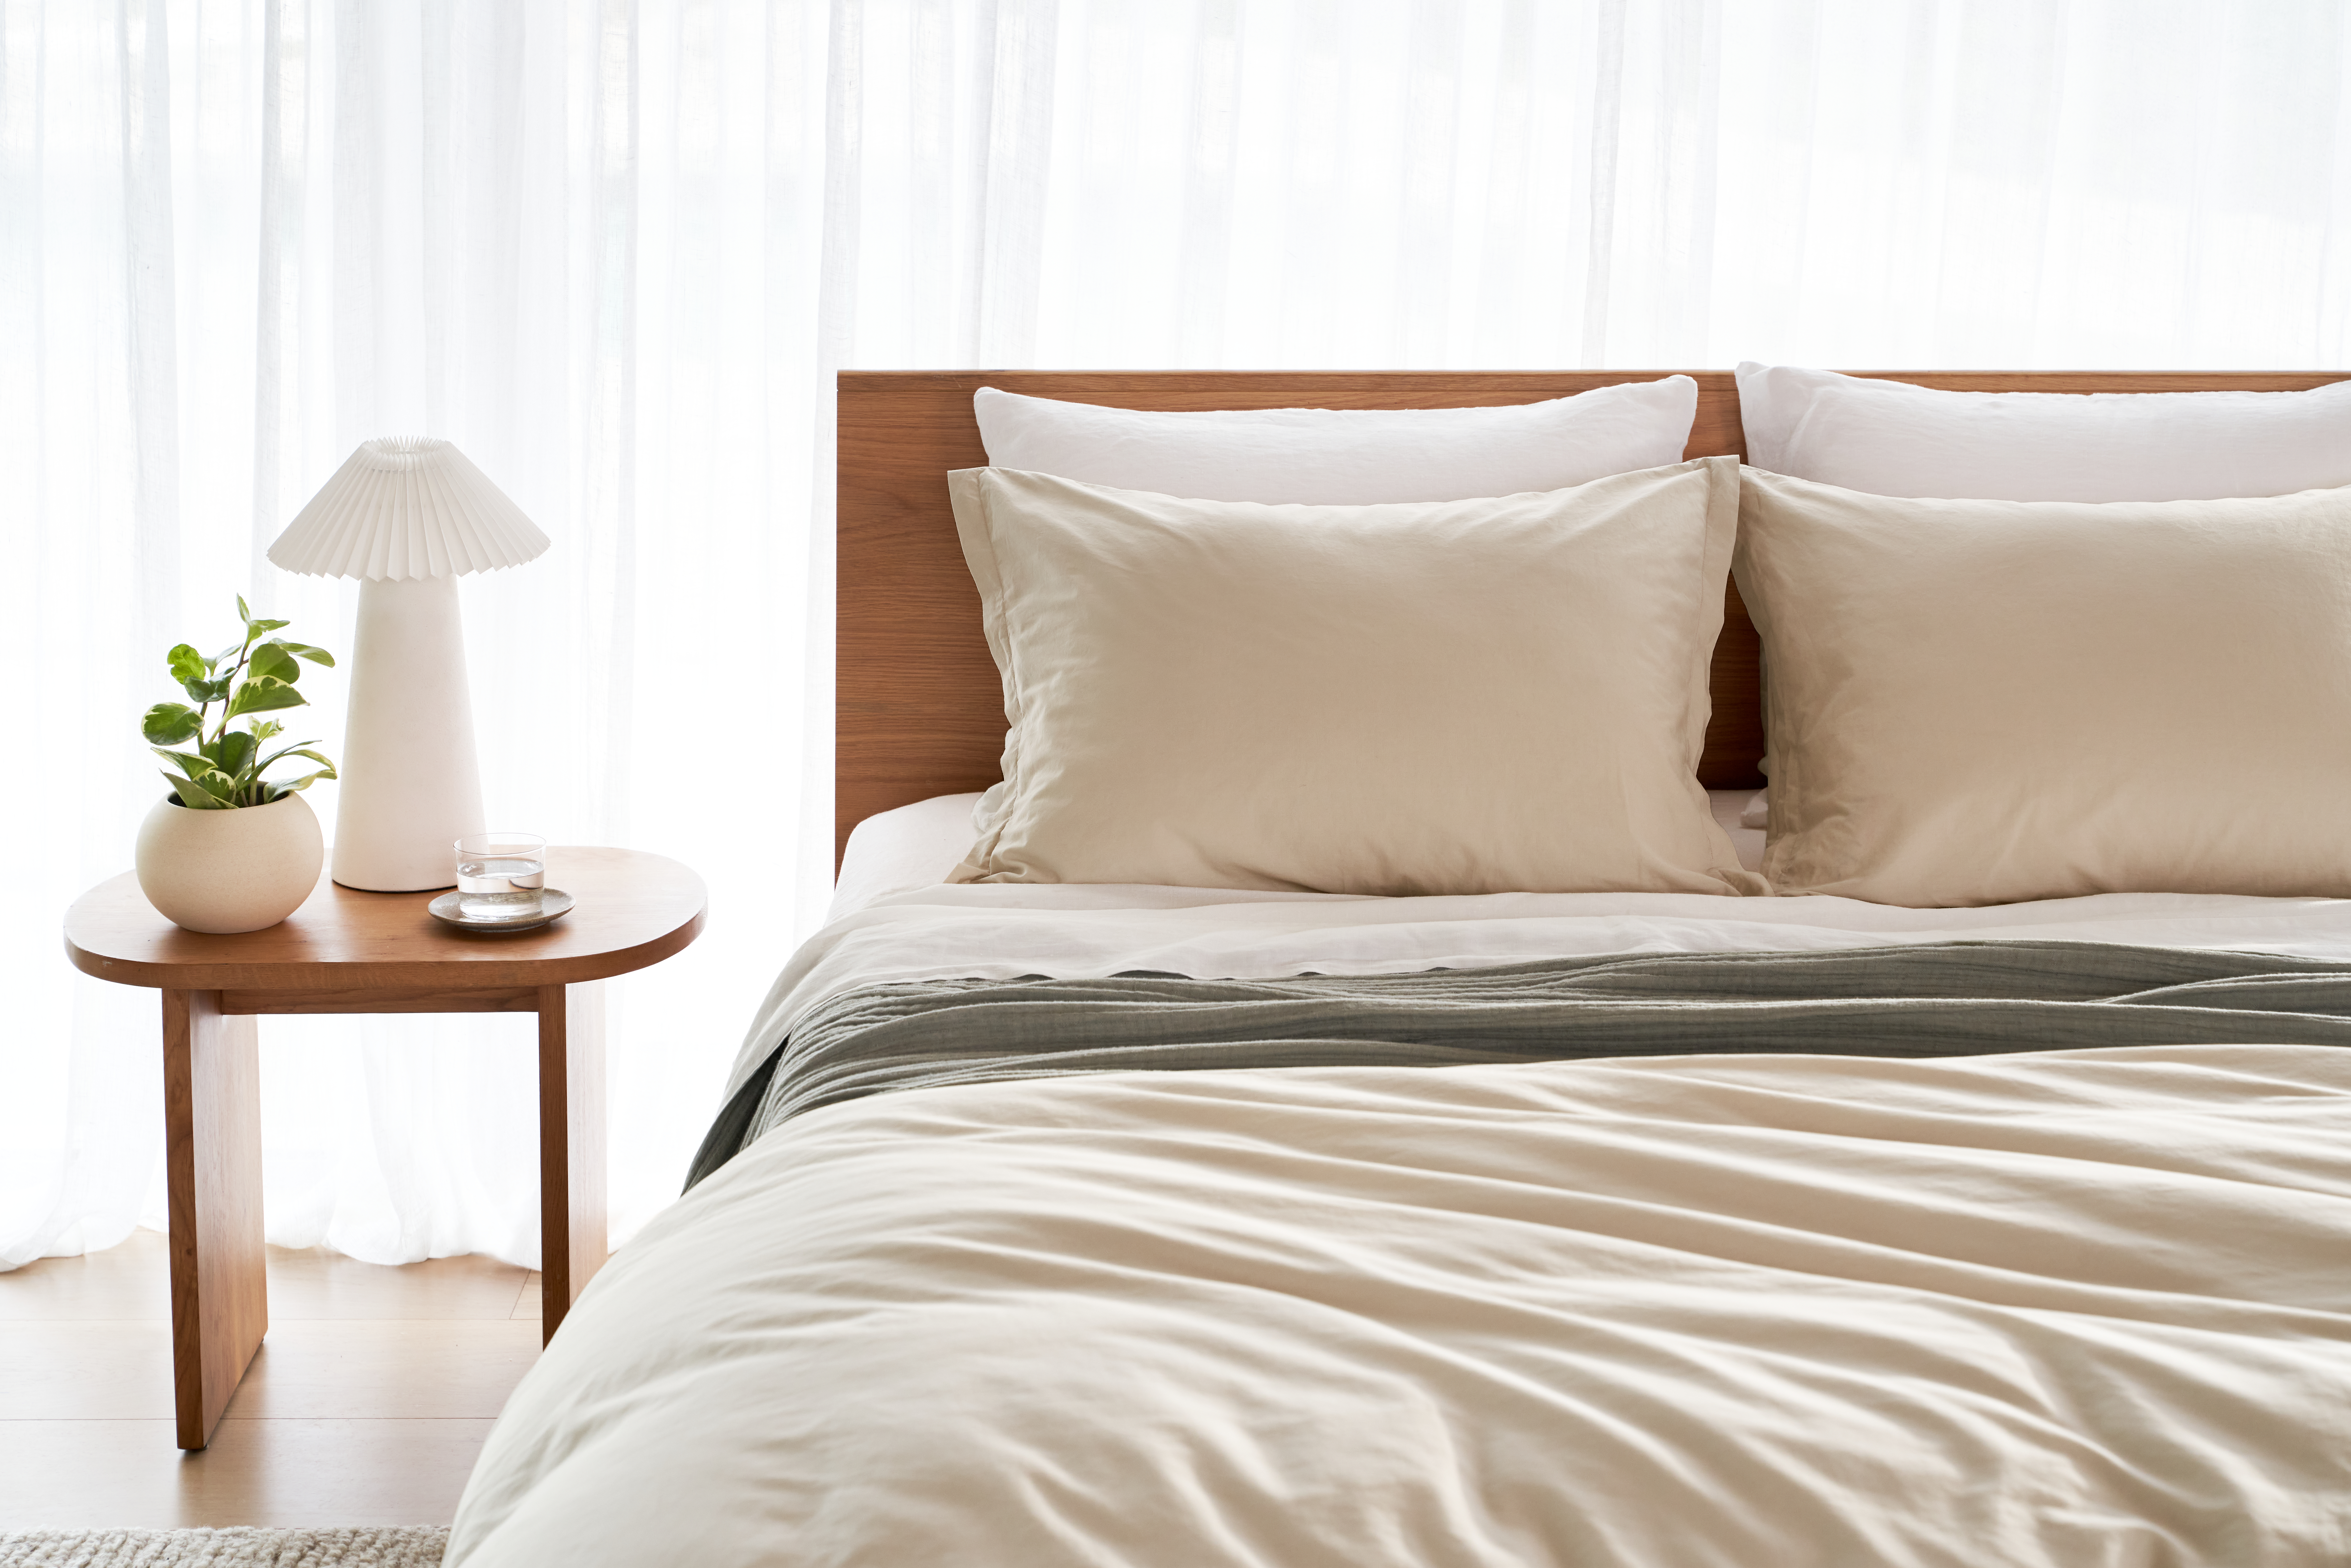 Close up image of neutral colored percale sheeting on a bed in a bright bedroom